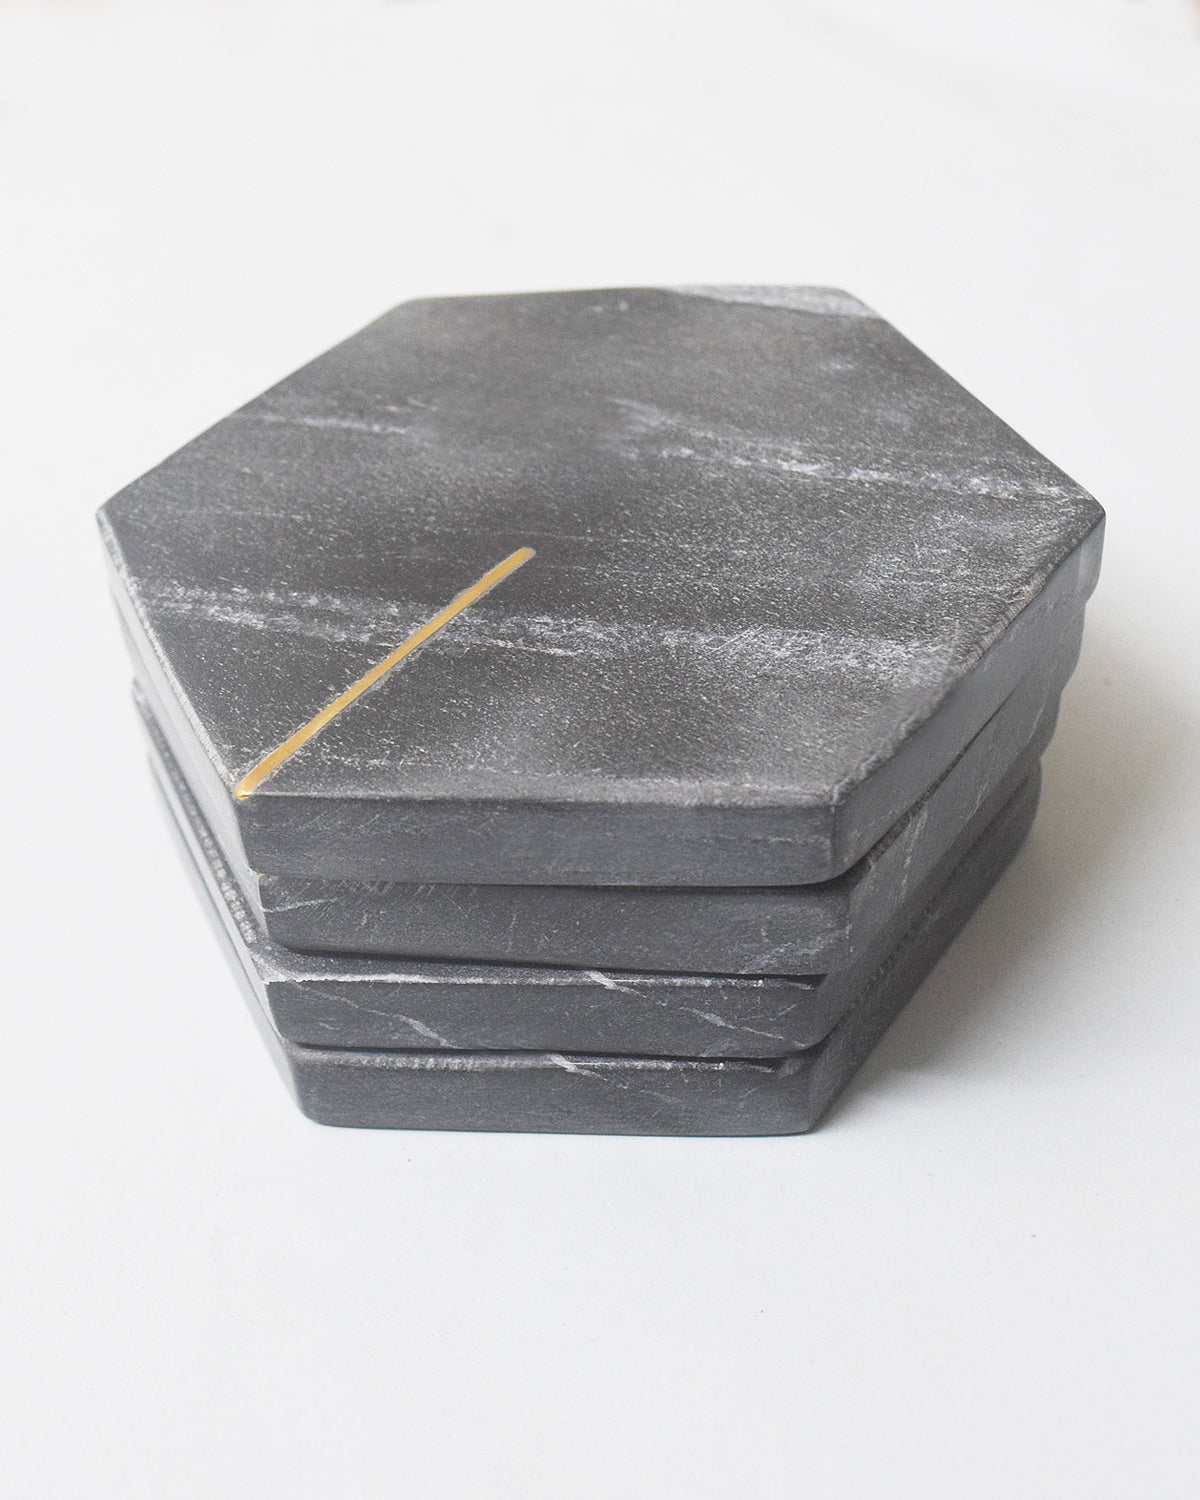 Black Hexagonal Marble Coasters with Brass Inlay - Set of 4